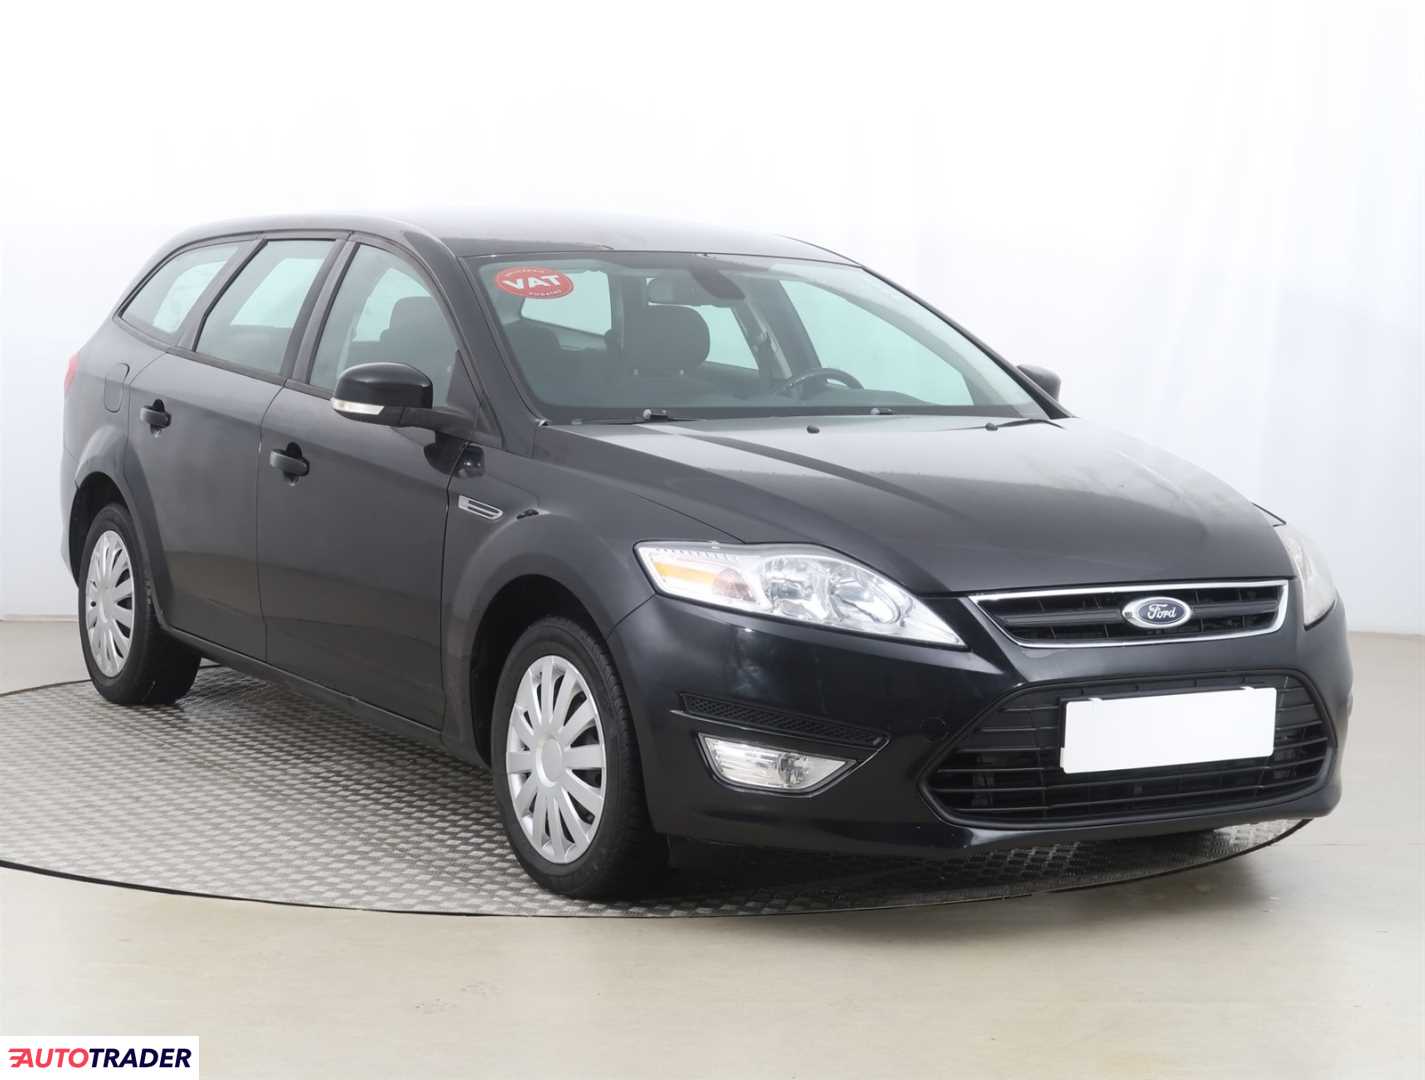 Ford Mondeo 2013 1.6 113 KM